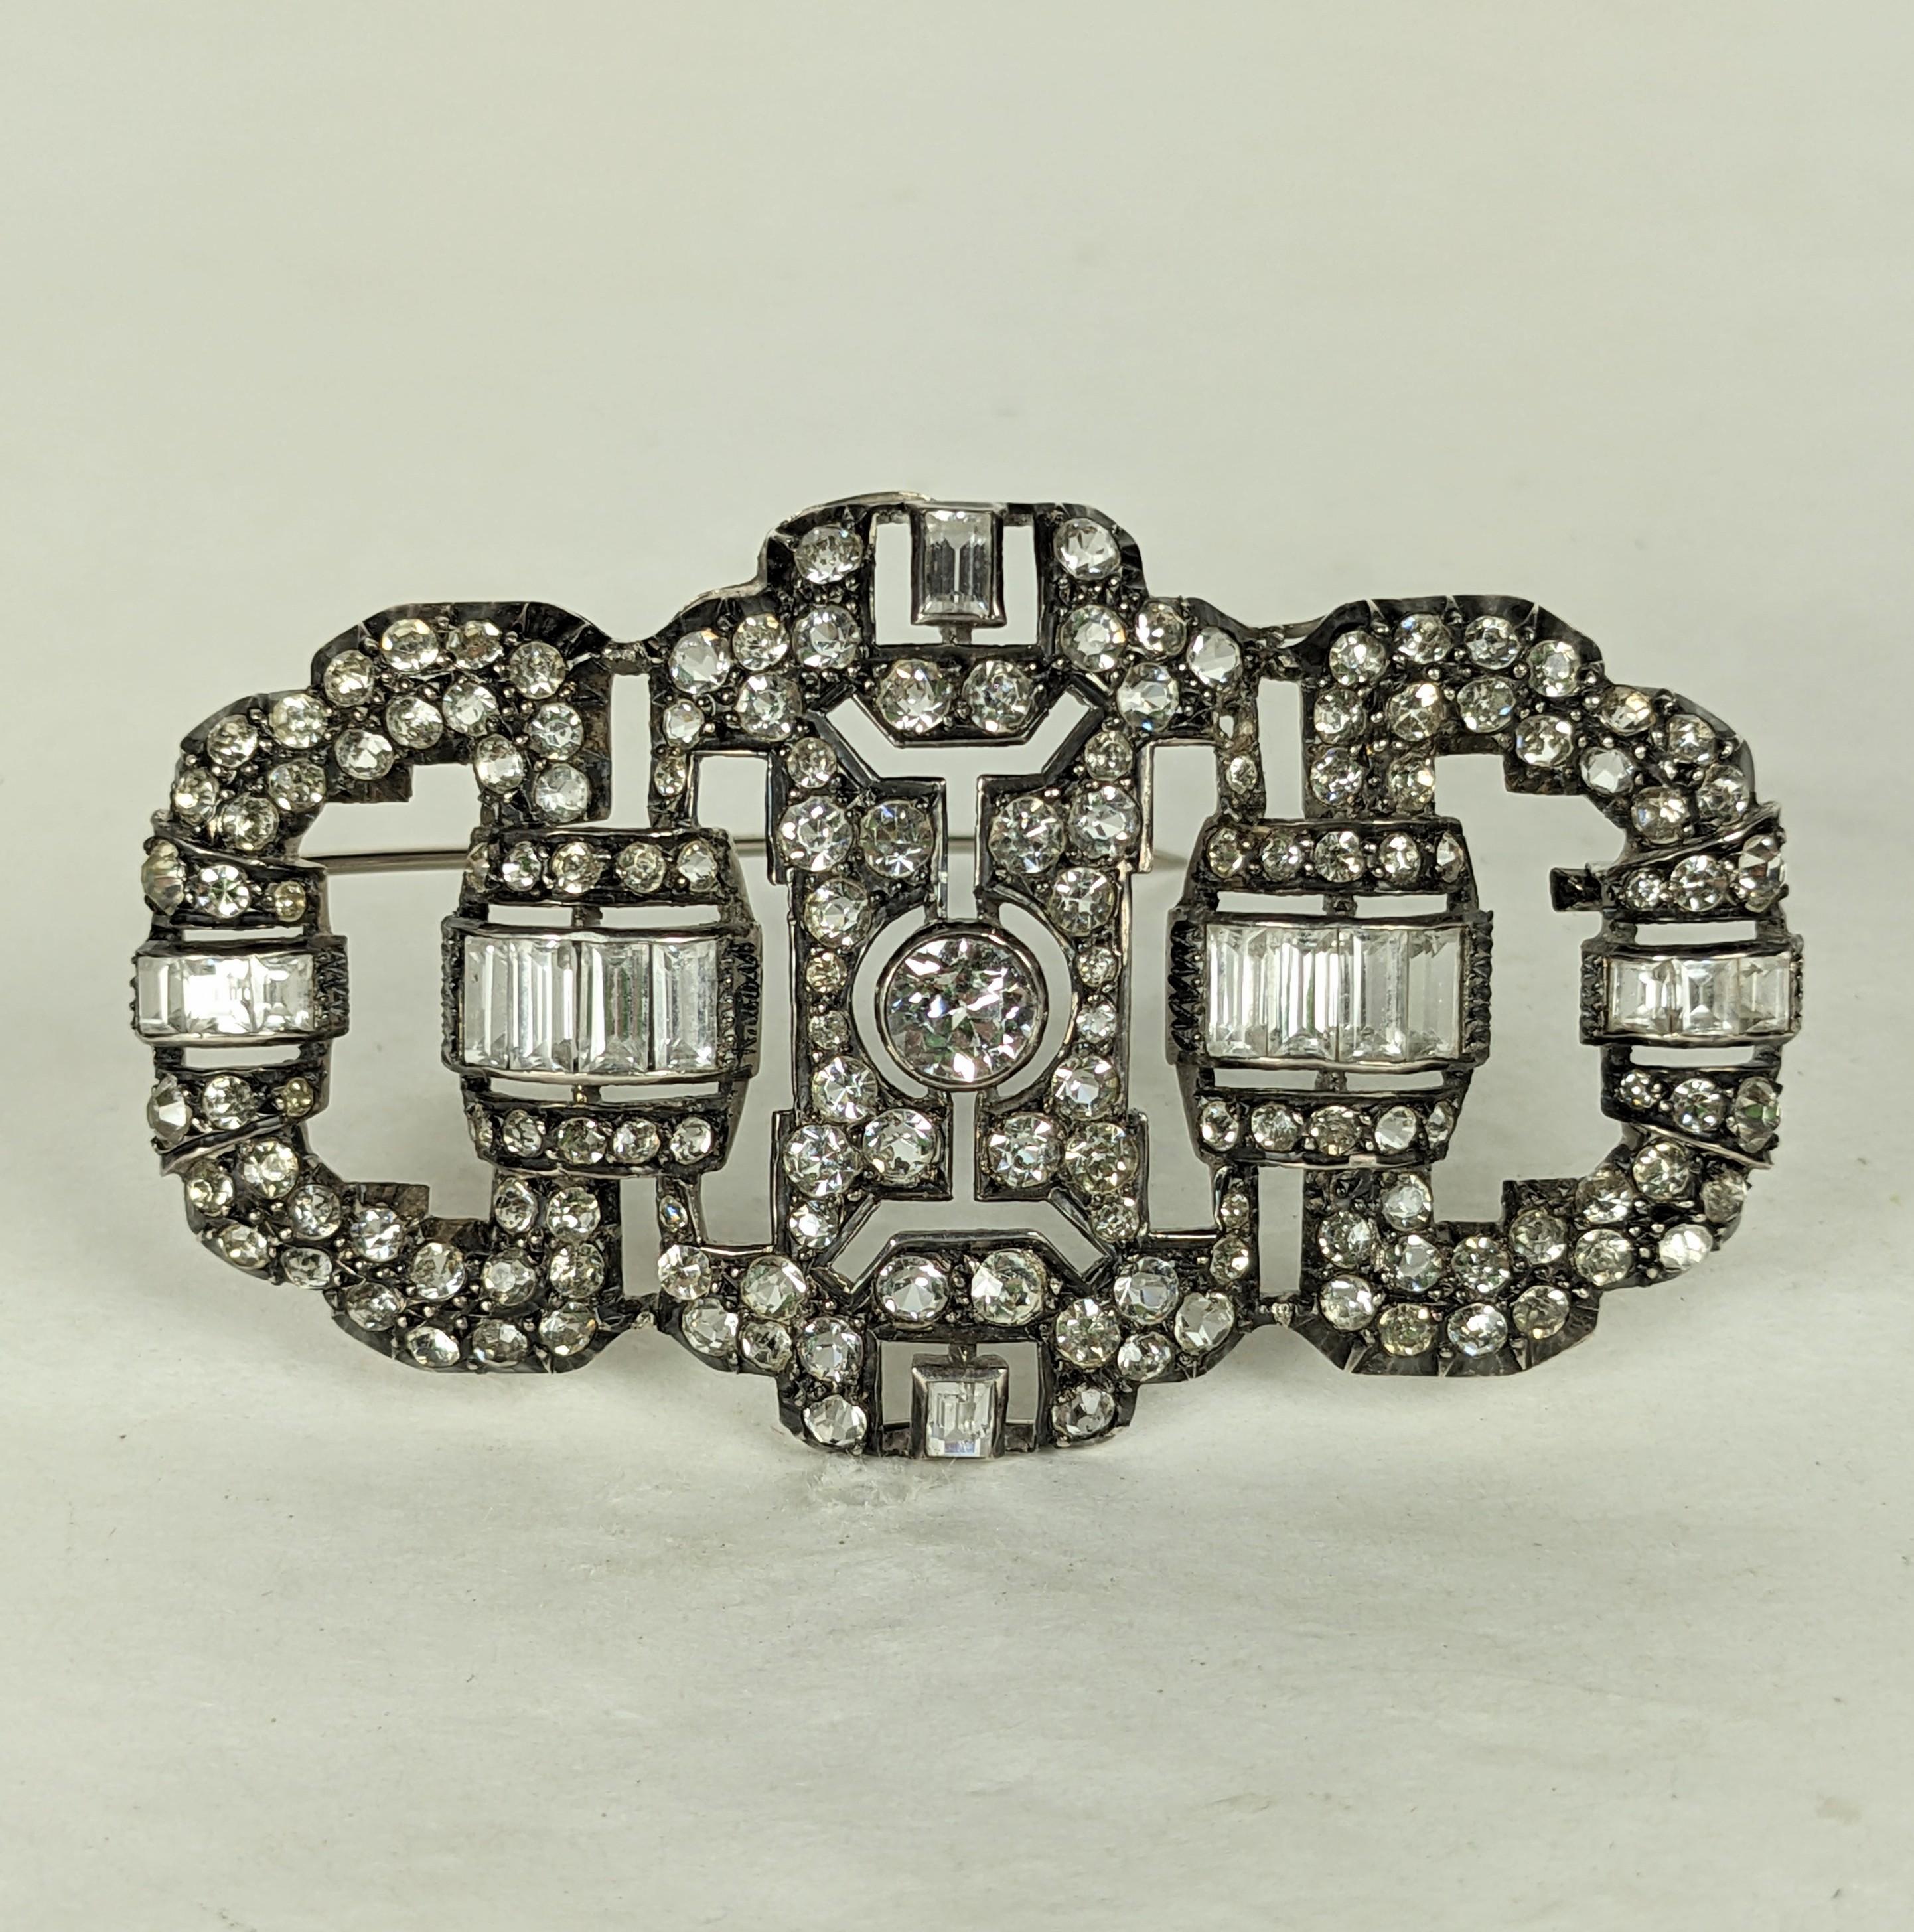 Art Deco Paste Brooch France set in sterling from the 1920's. Beautiful quality construction and high style design. 2.5